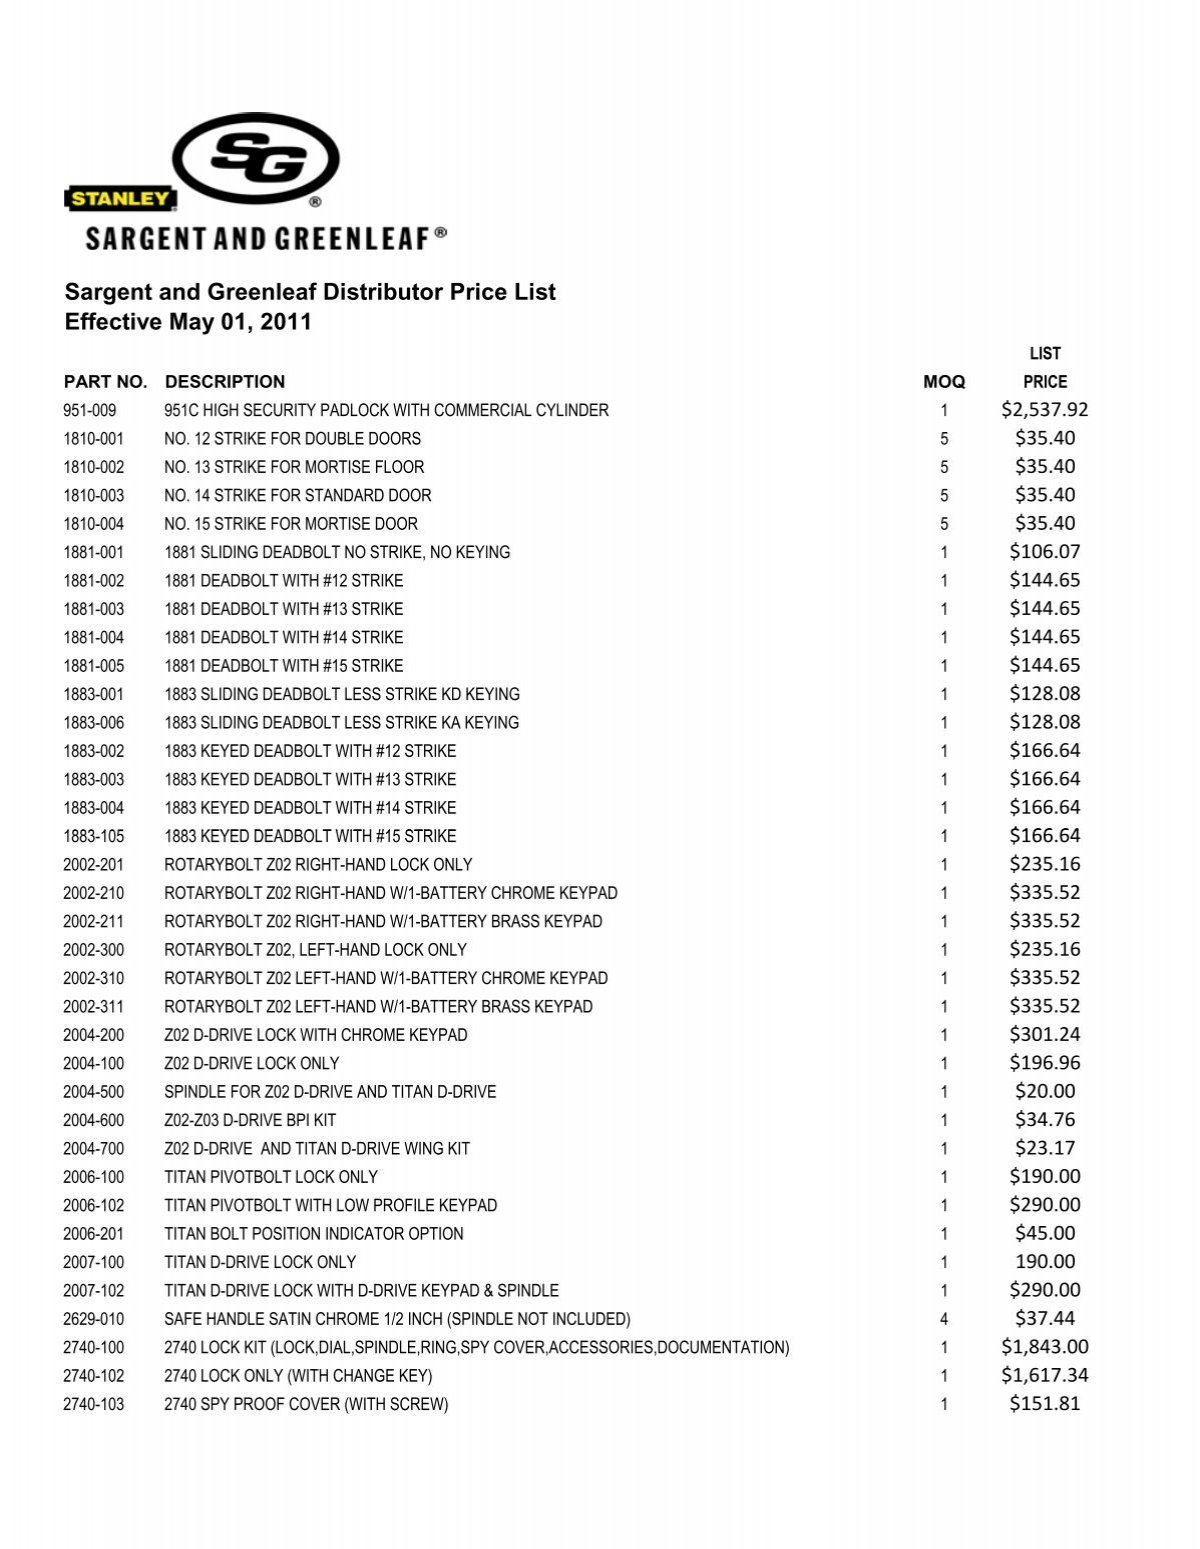 2011-distributor-price-list-eff-may-1-2011-sargent-and-greenleaf